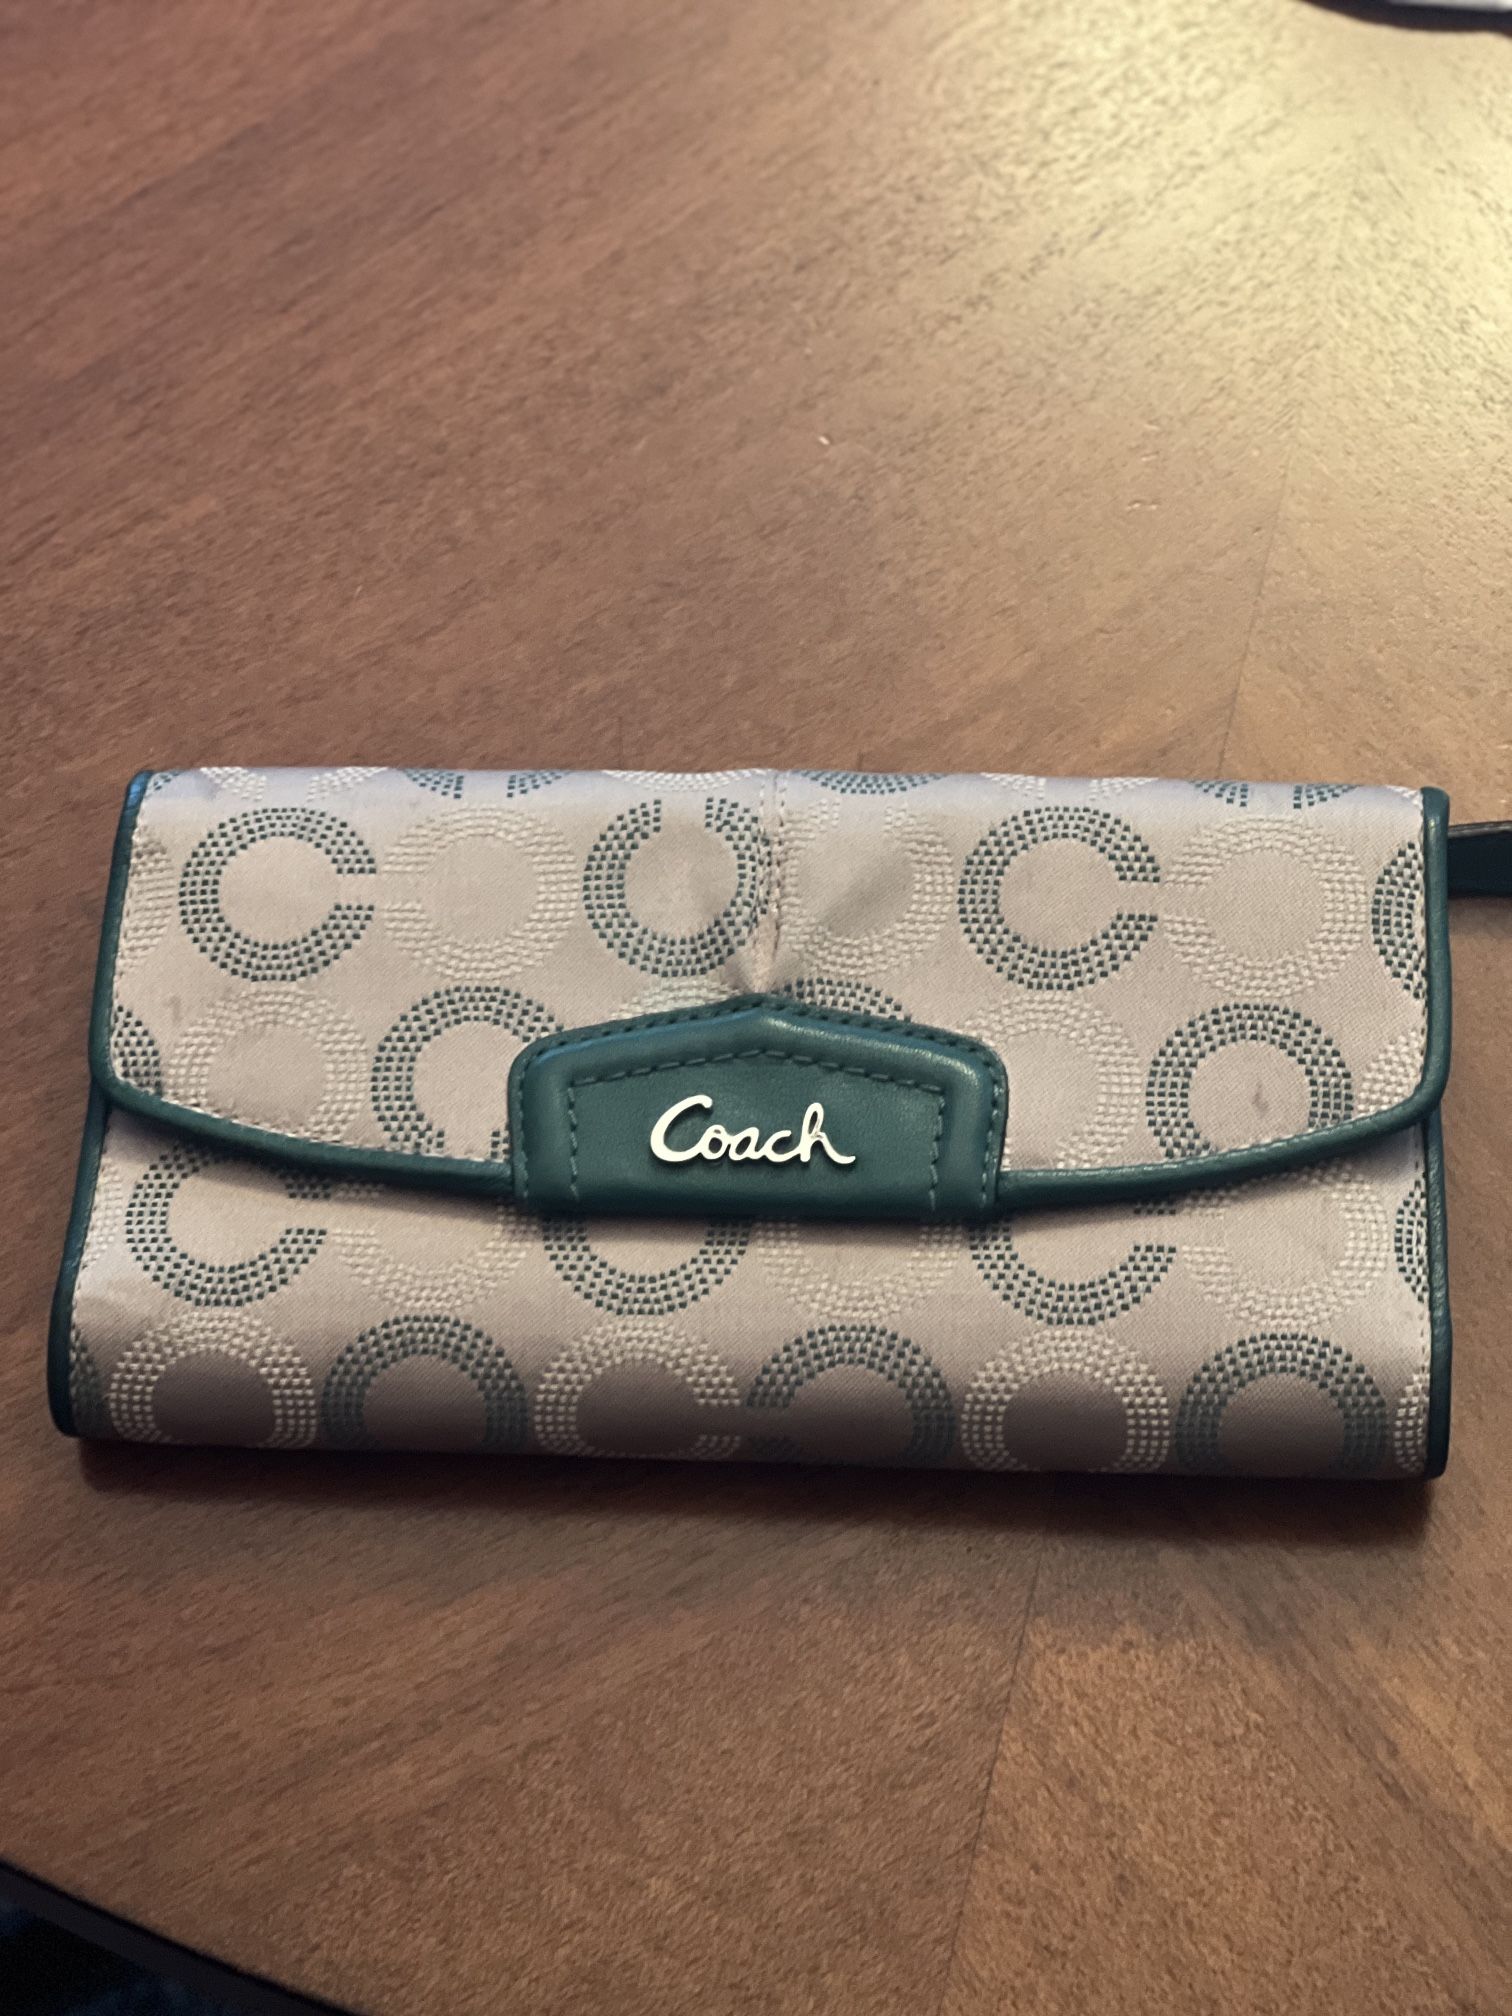 Coach Bag And Matching Wallet